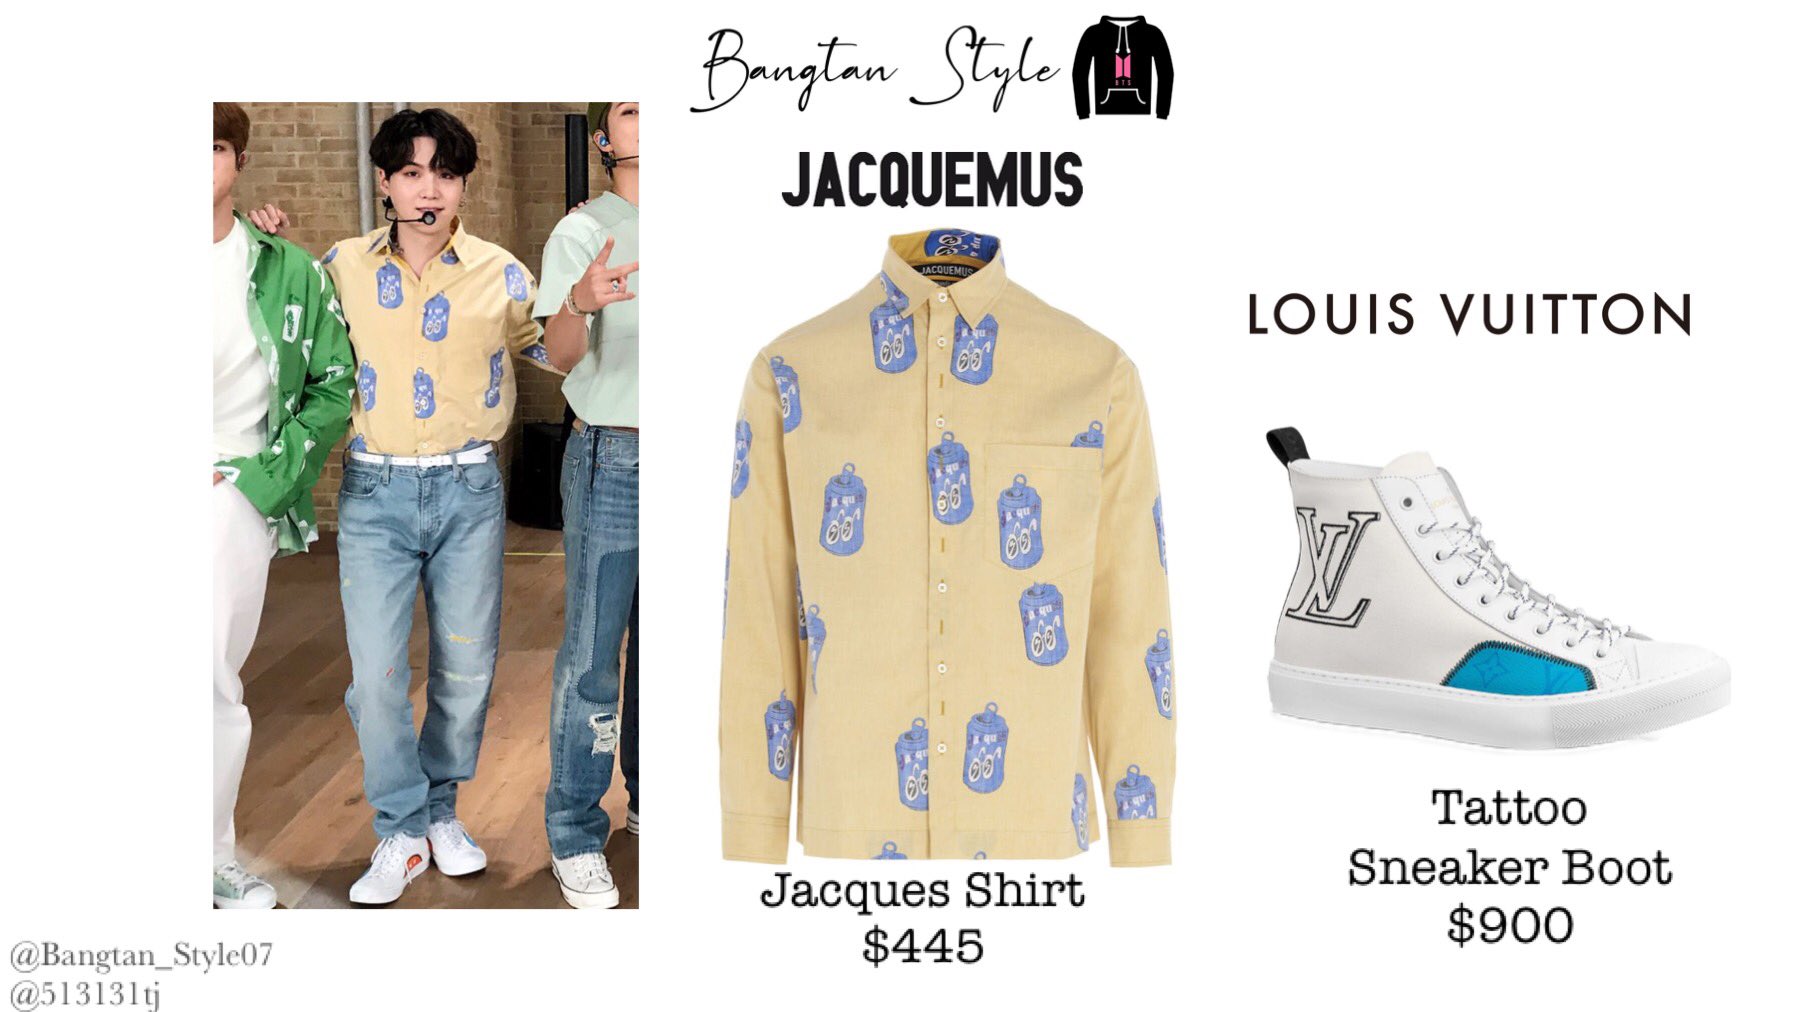 Bangtan Style⁷ (slow) on X: VLIVE 210830 Namjoon wears FEAR OF GOD FG  T-shirt ($265) & LOUIS VUITTON Keepall Bandoulière 40 ($3350) with Carrot  Pouch ($1330). #RM #BTS @BTS_twt  / X